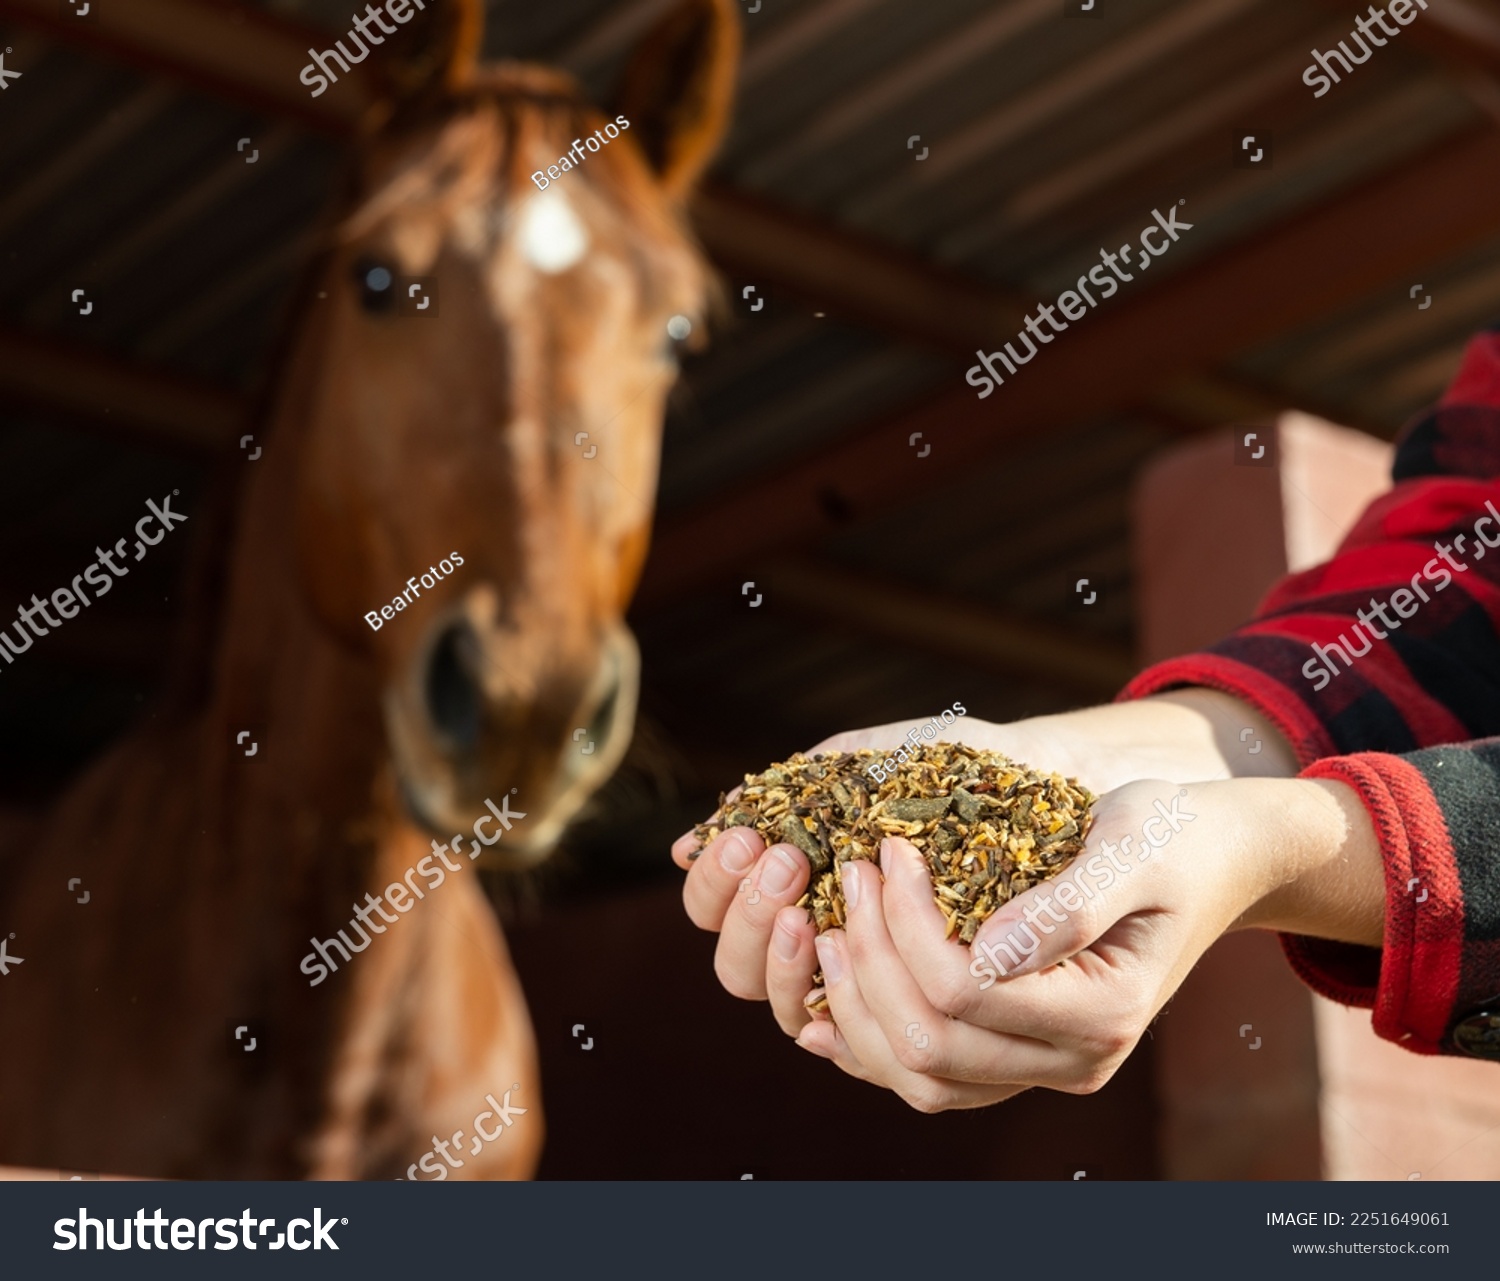 Crop hands of faceless female holding horse feed with corn, barley, oats grain in front of brown horse at stables #2251649061